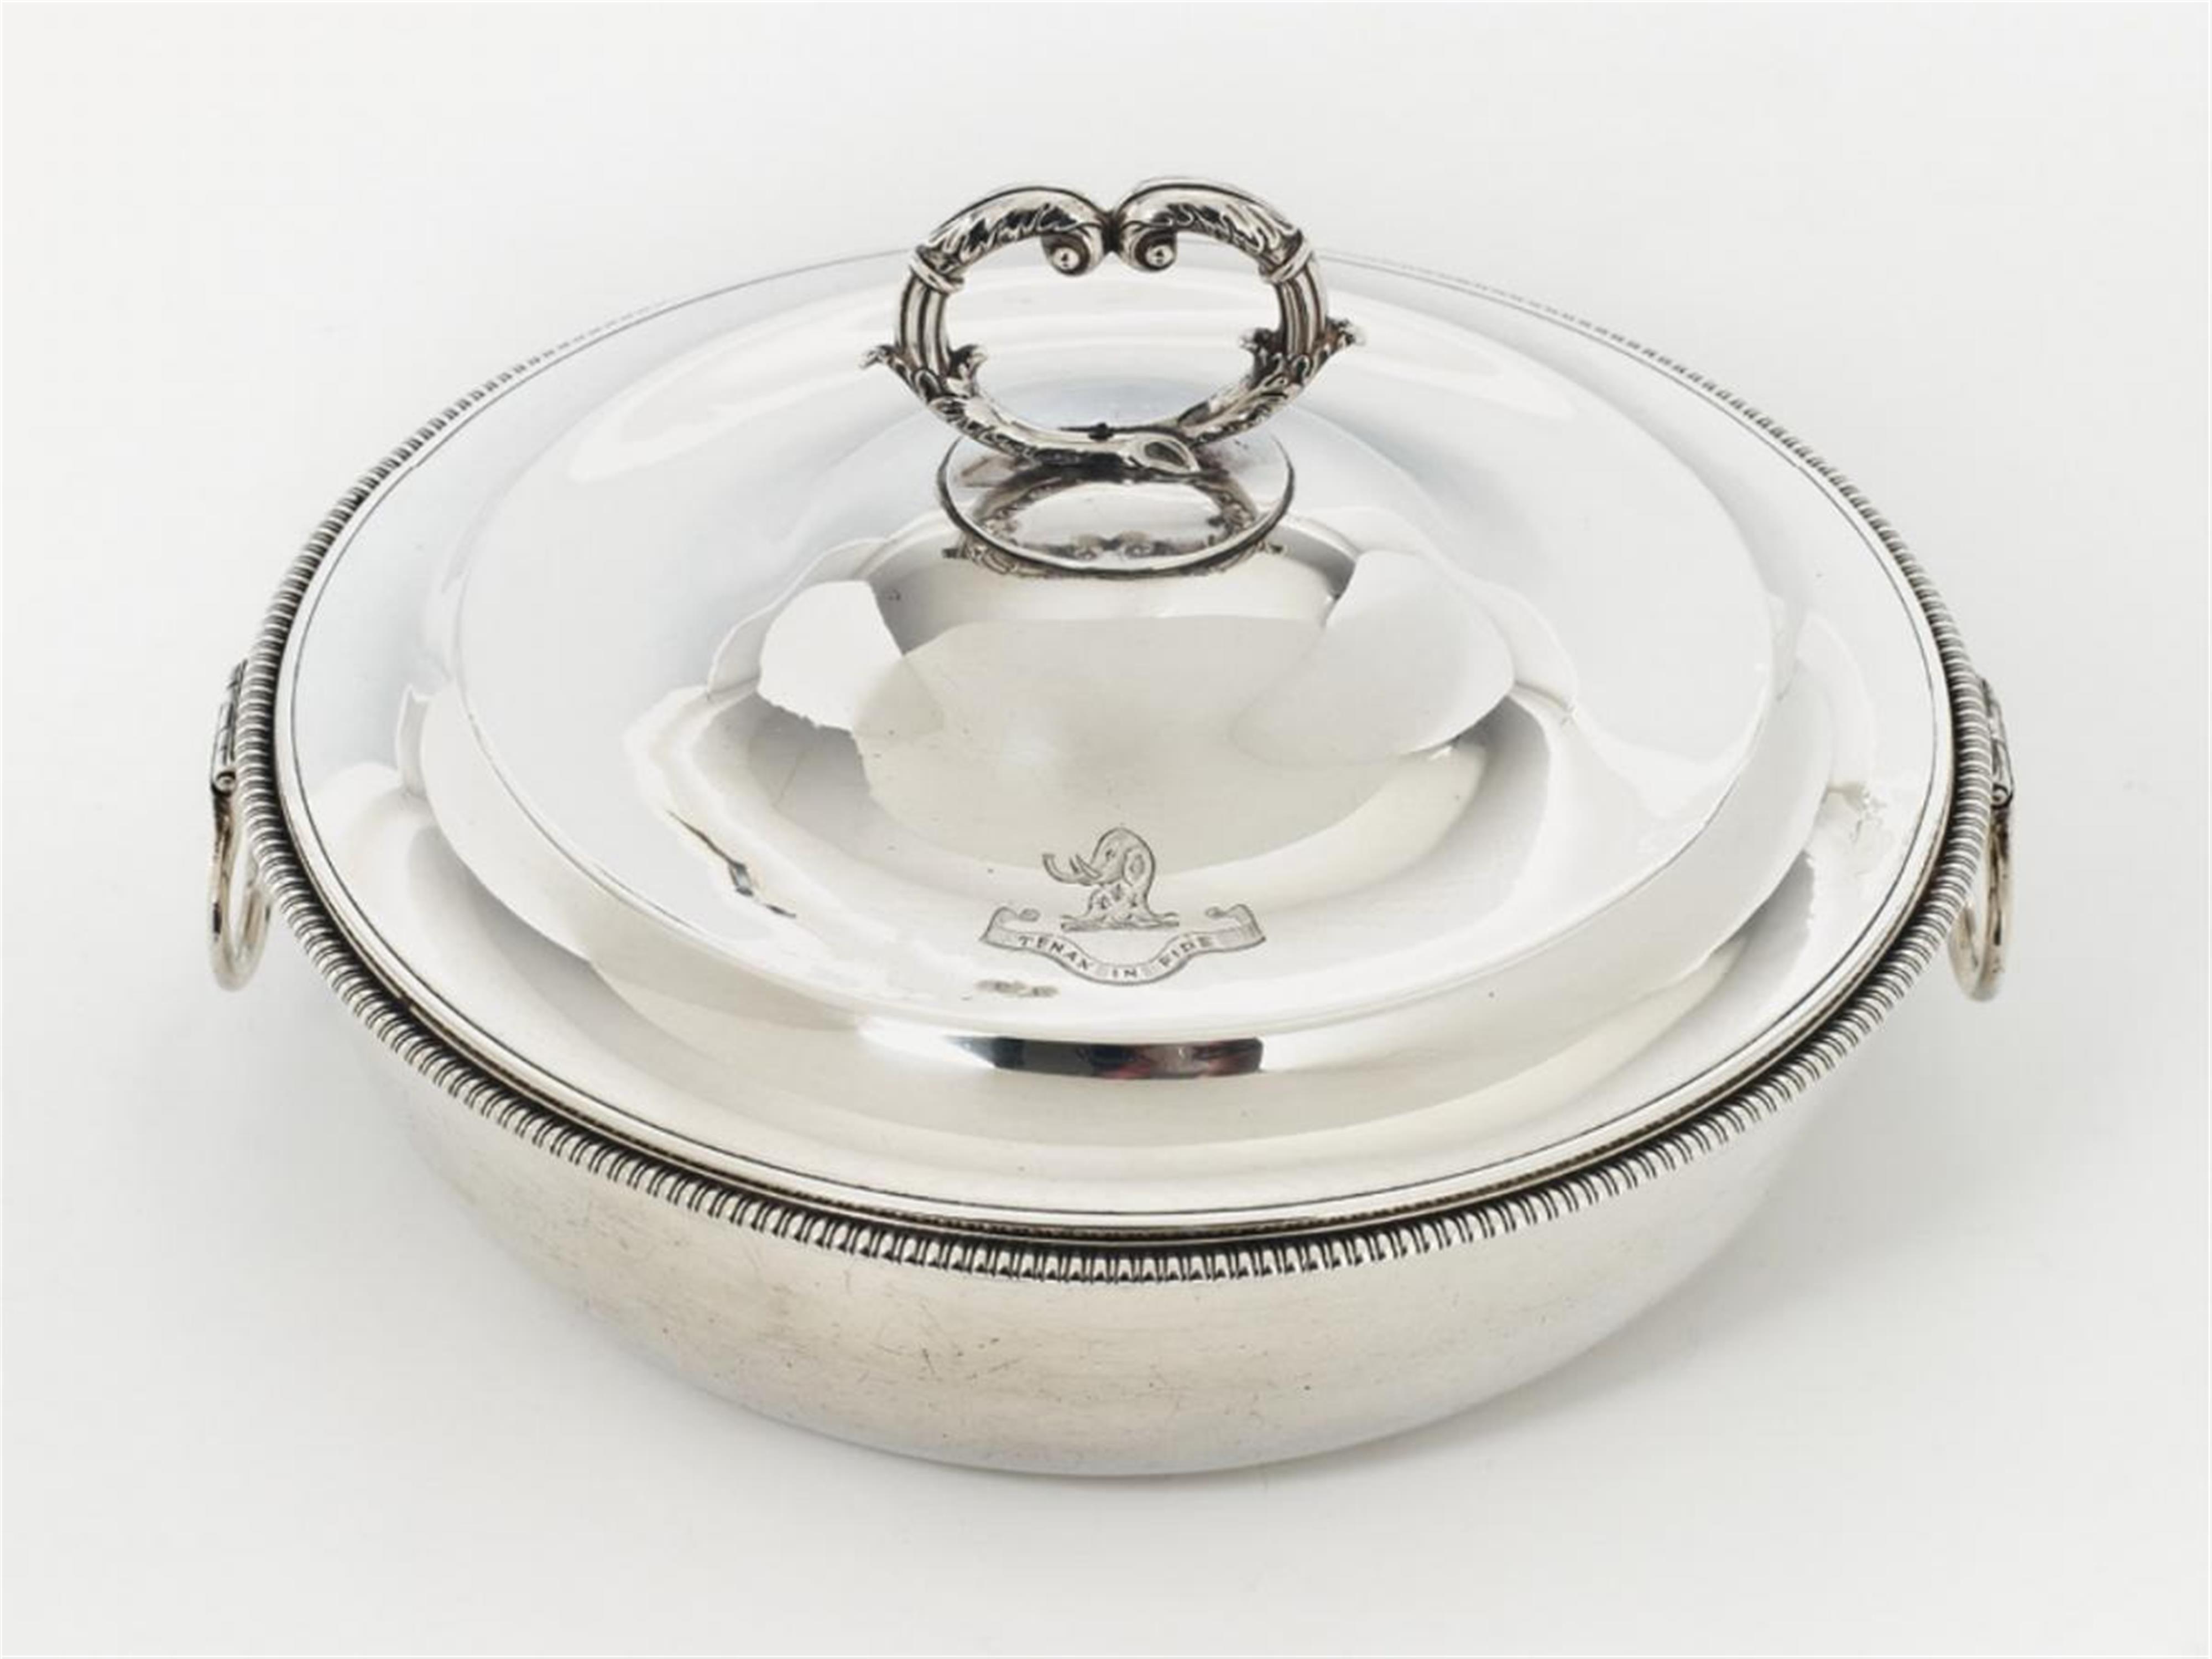 A George III London silver dish and cover. Engraved with crest and motto of the Abel-Smith family "TENAX IN FIDE". Marks of Digby Scott & Benjamin Smith II, 1802. - image-1